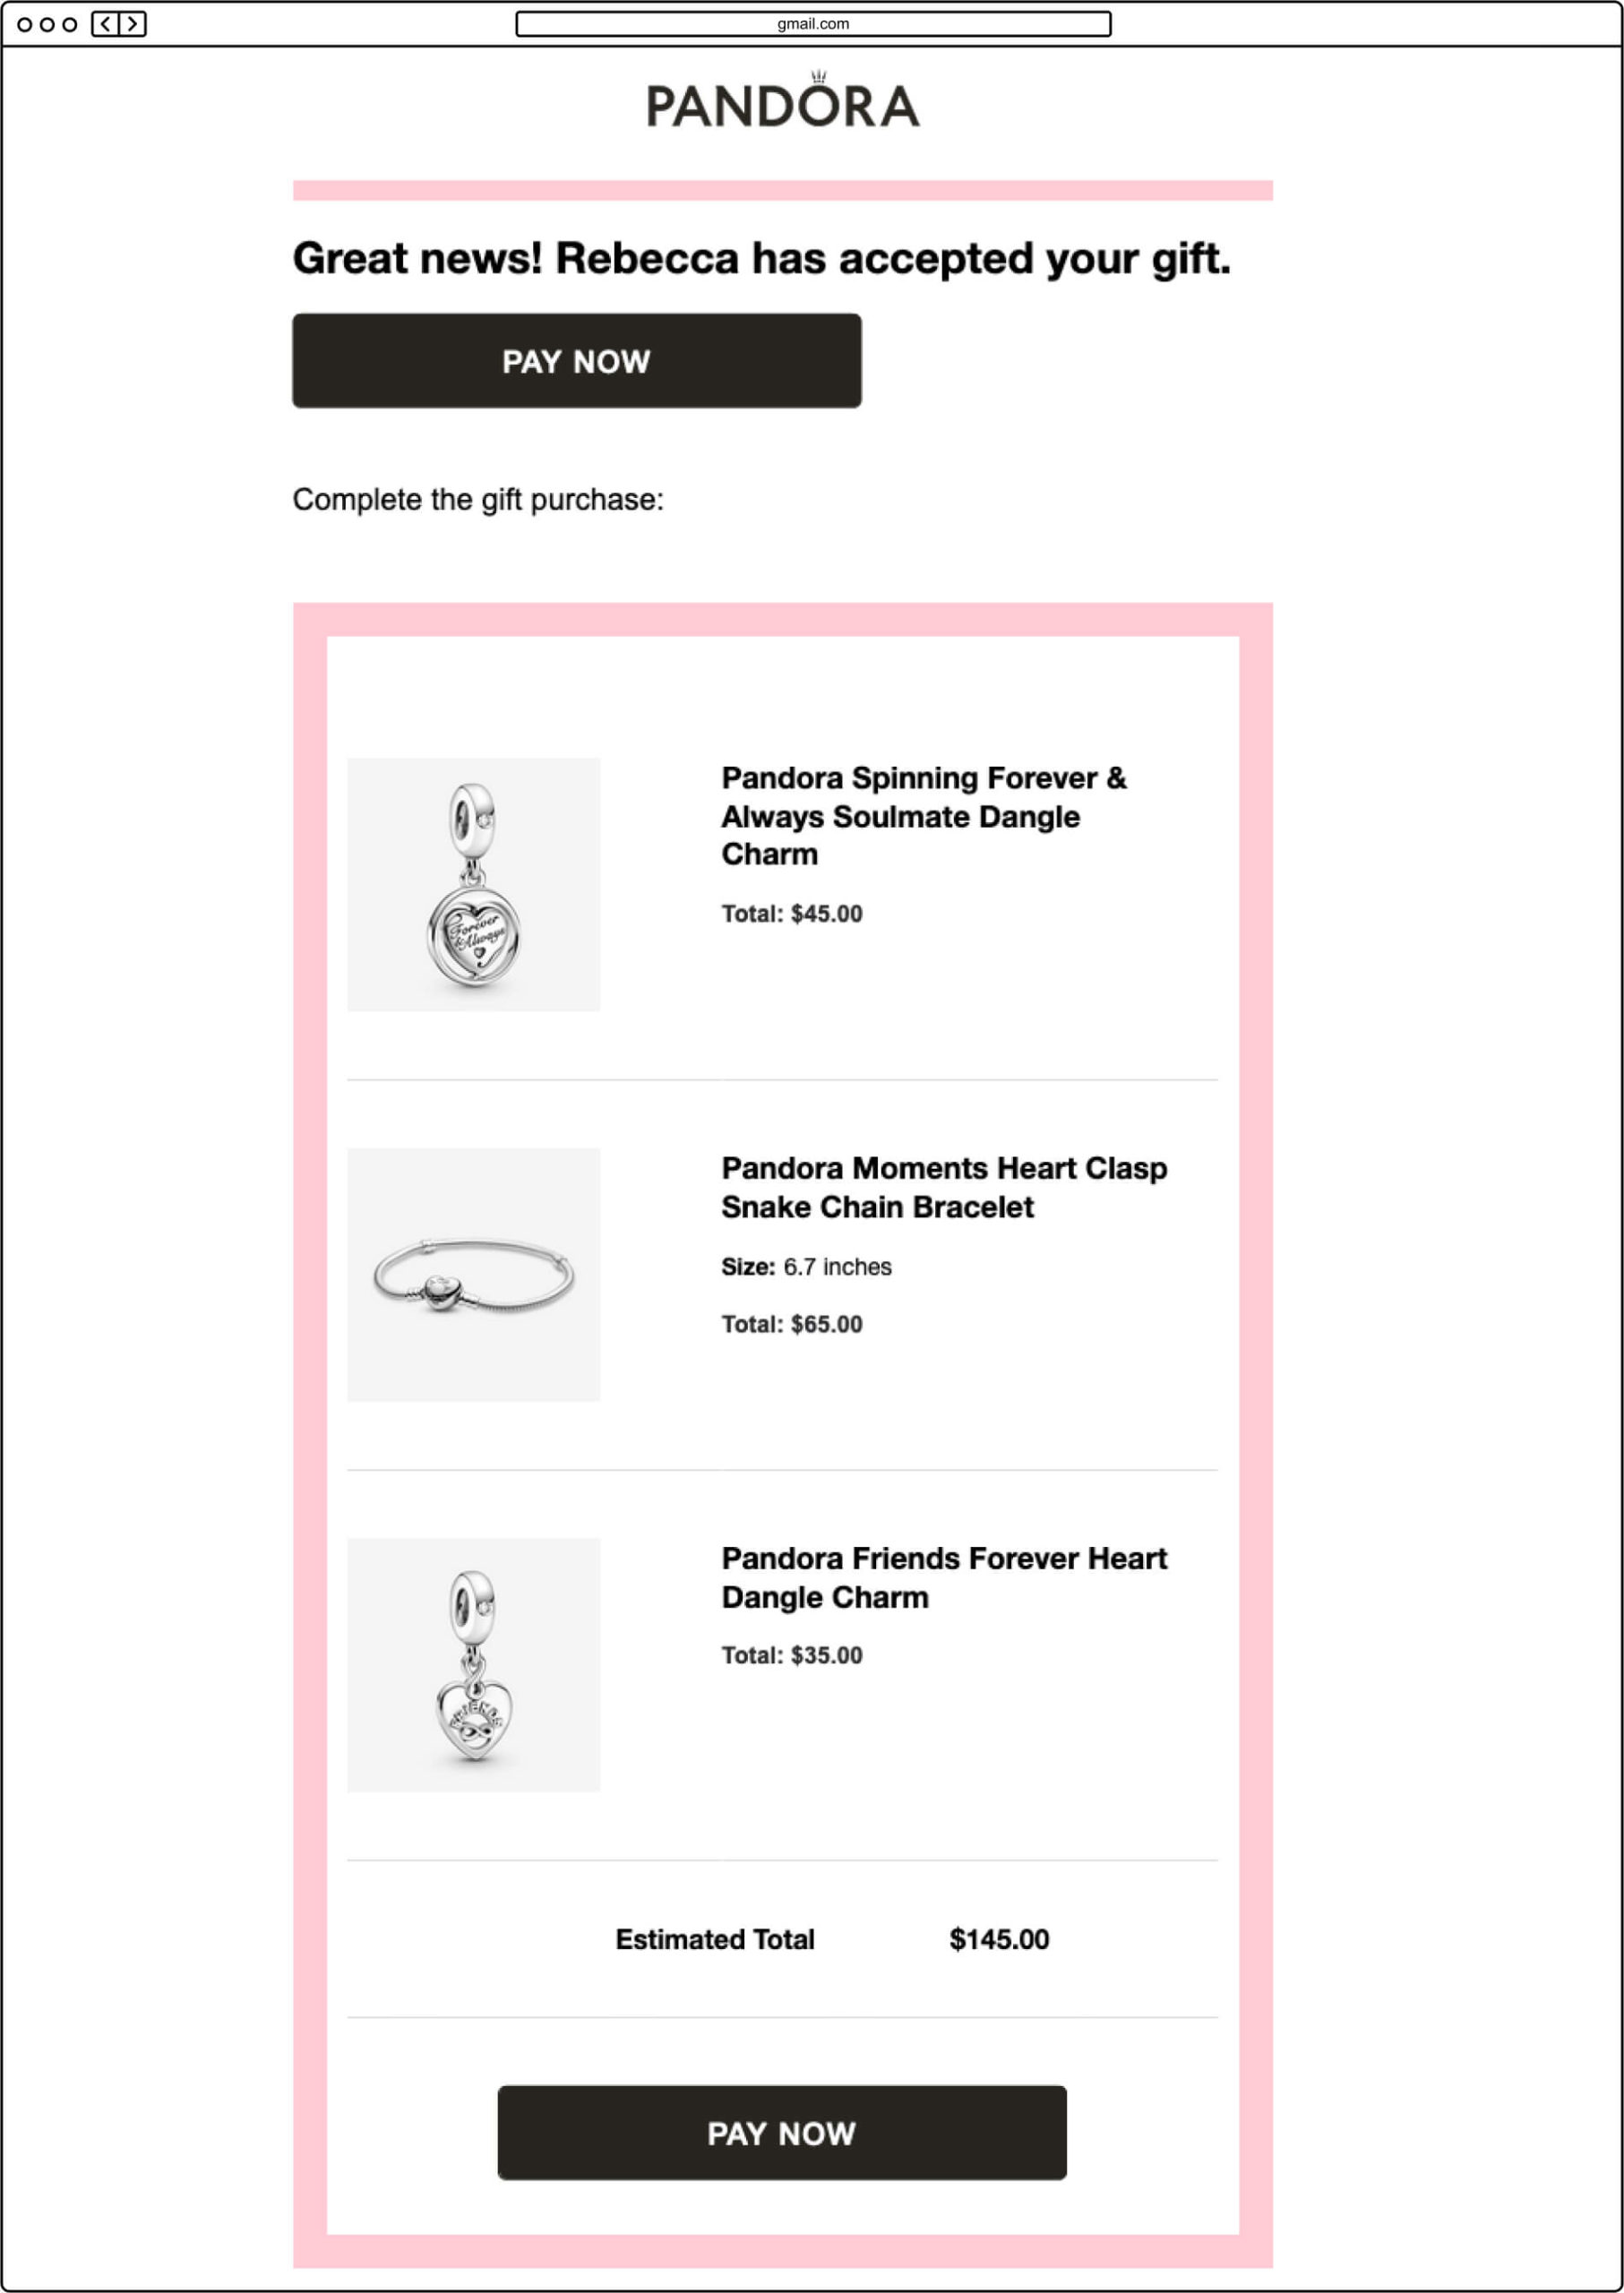 Pandora Gift Purchase Email